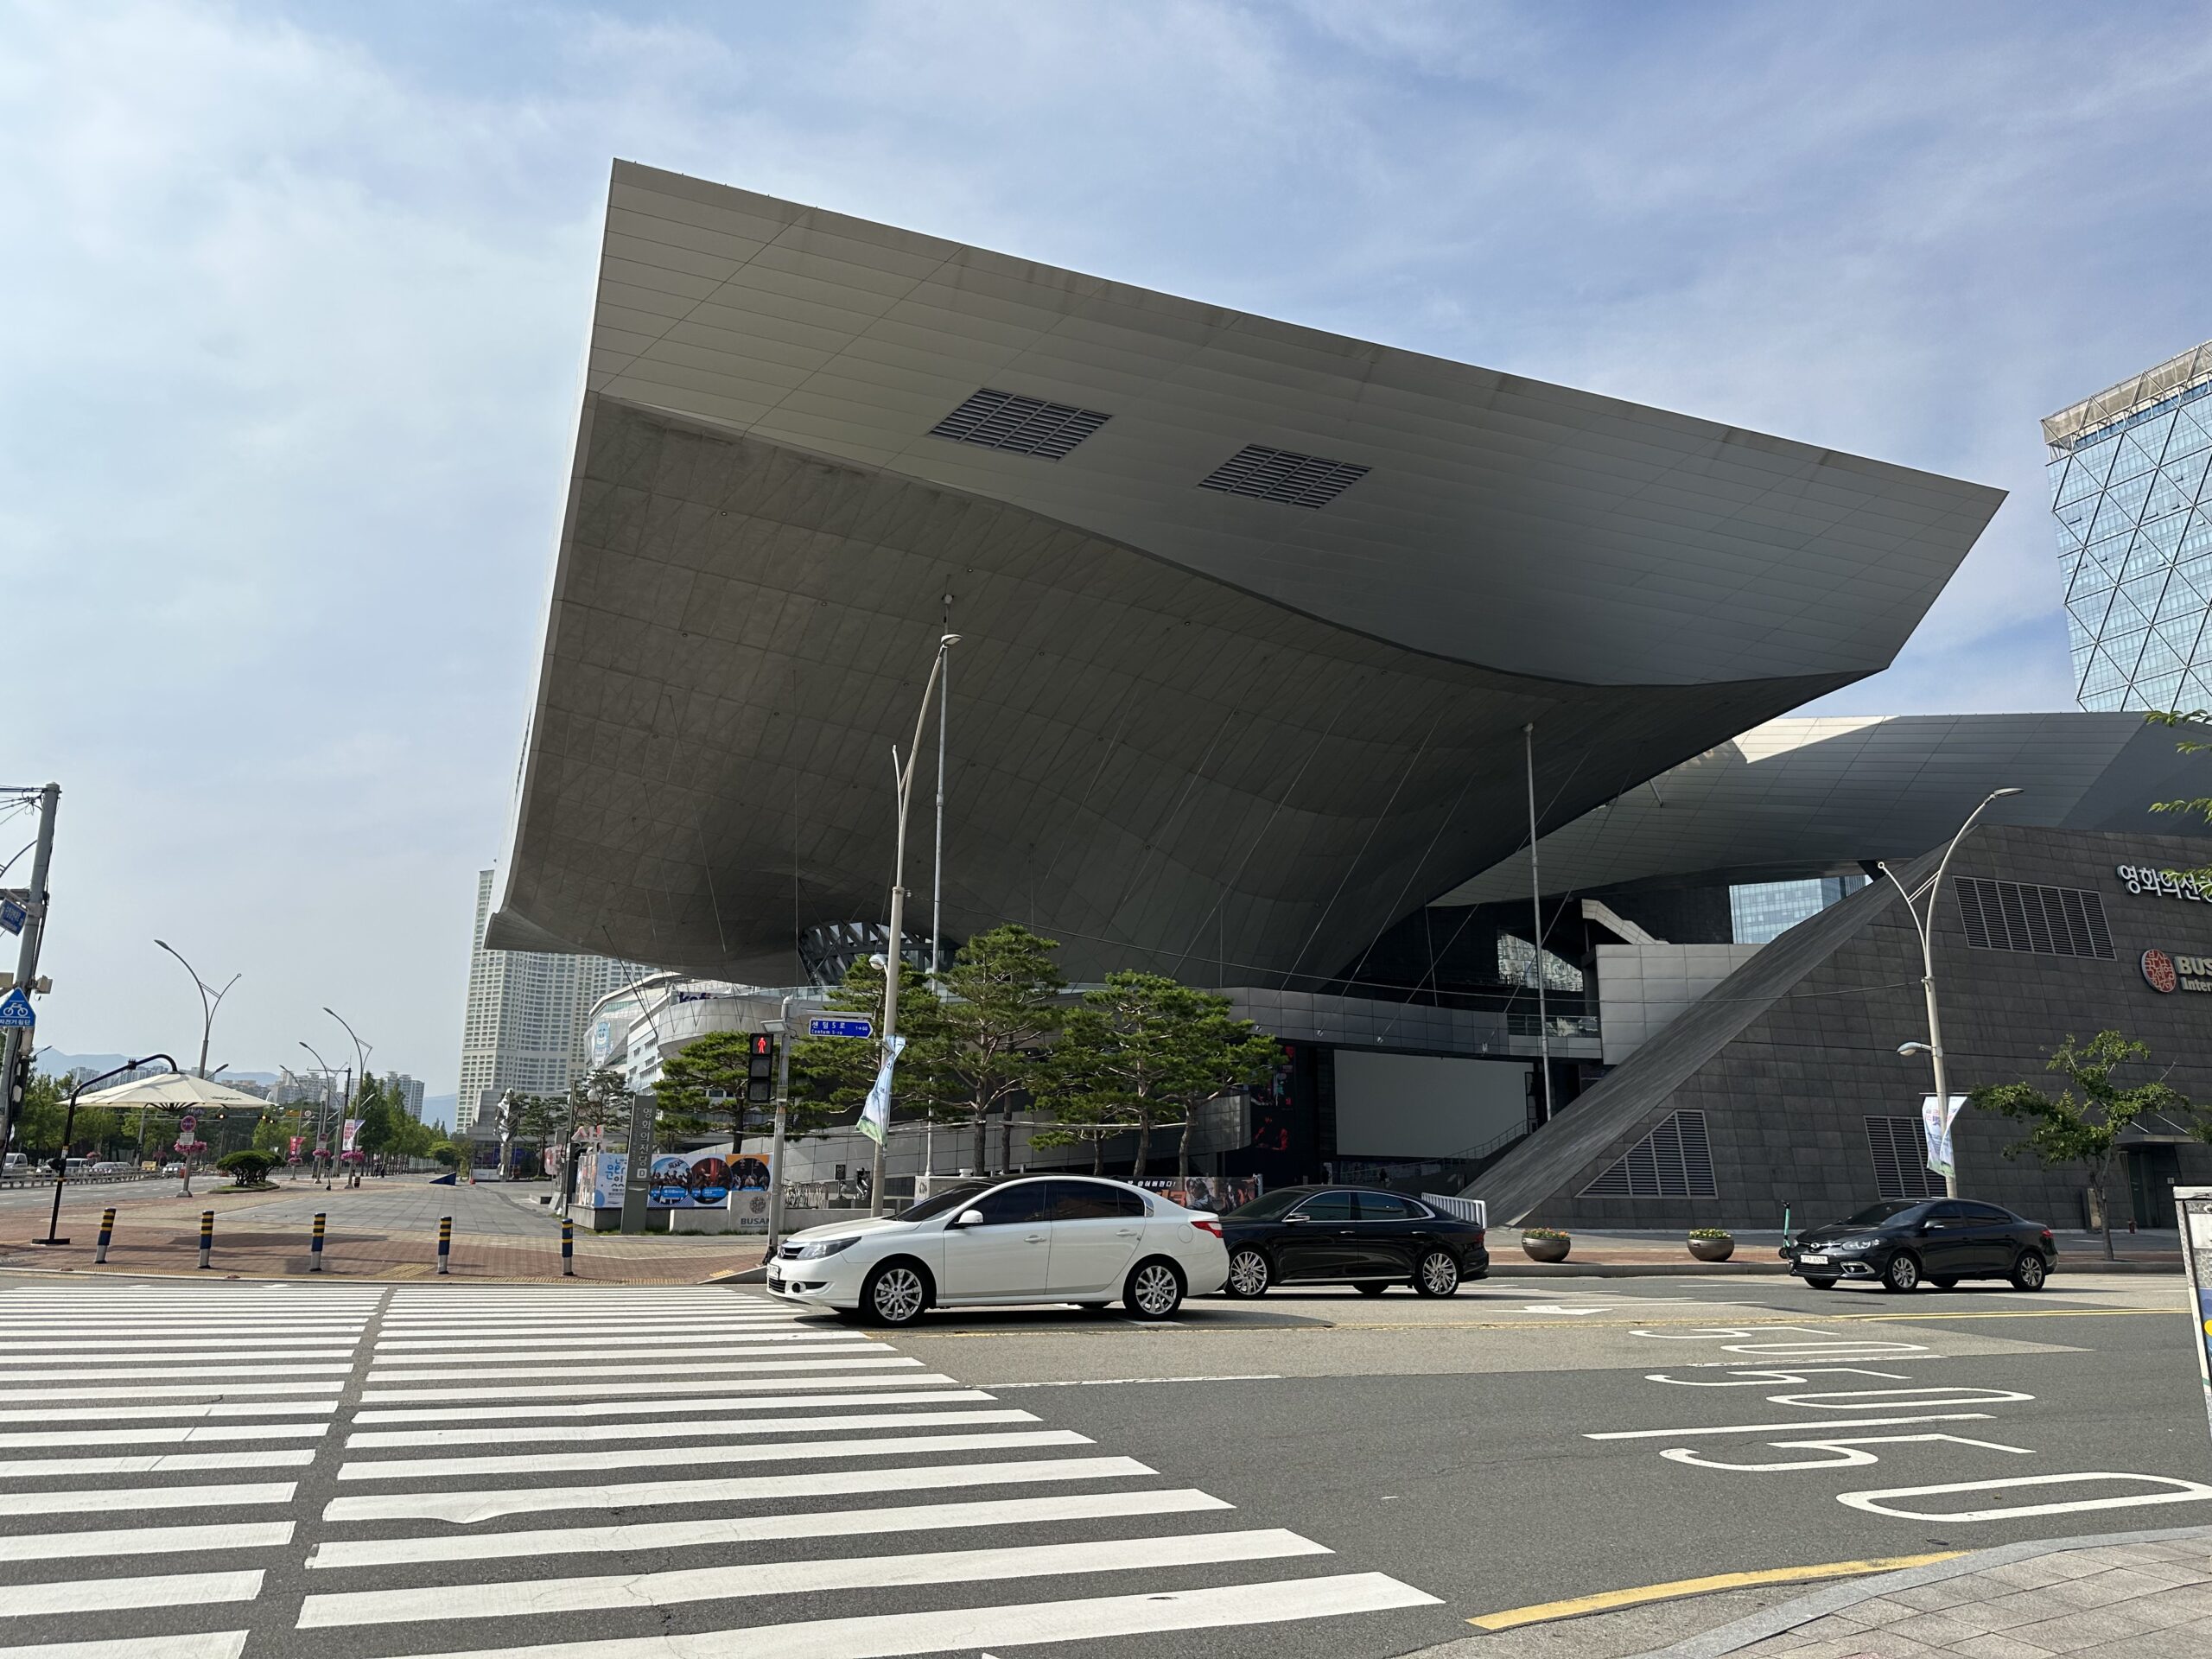 Close to Shinsegae Centumcity is the Busan Cinema Centre, where the Busan International Film Festival takes place. This place must look amazing at night with all the lights on, but I unfortunately missed this.